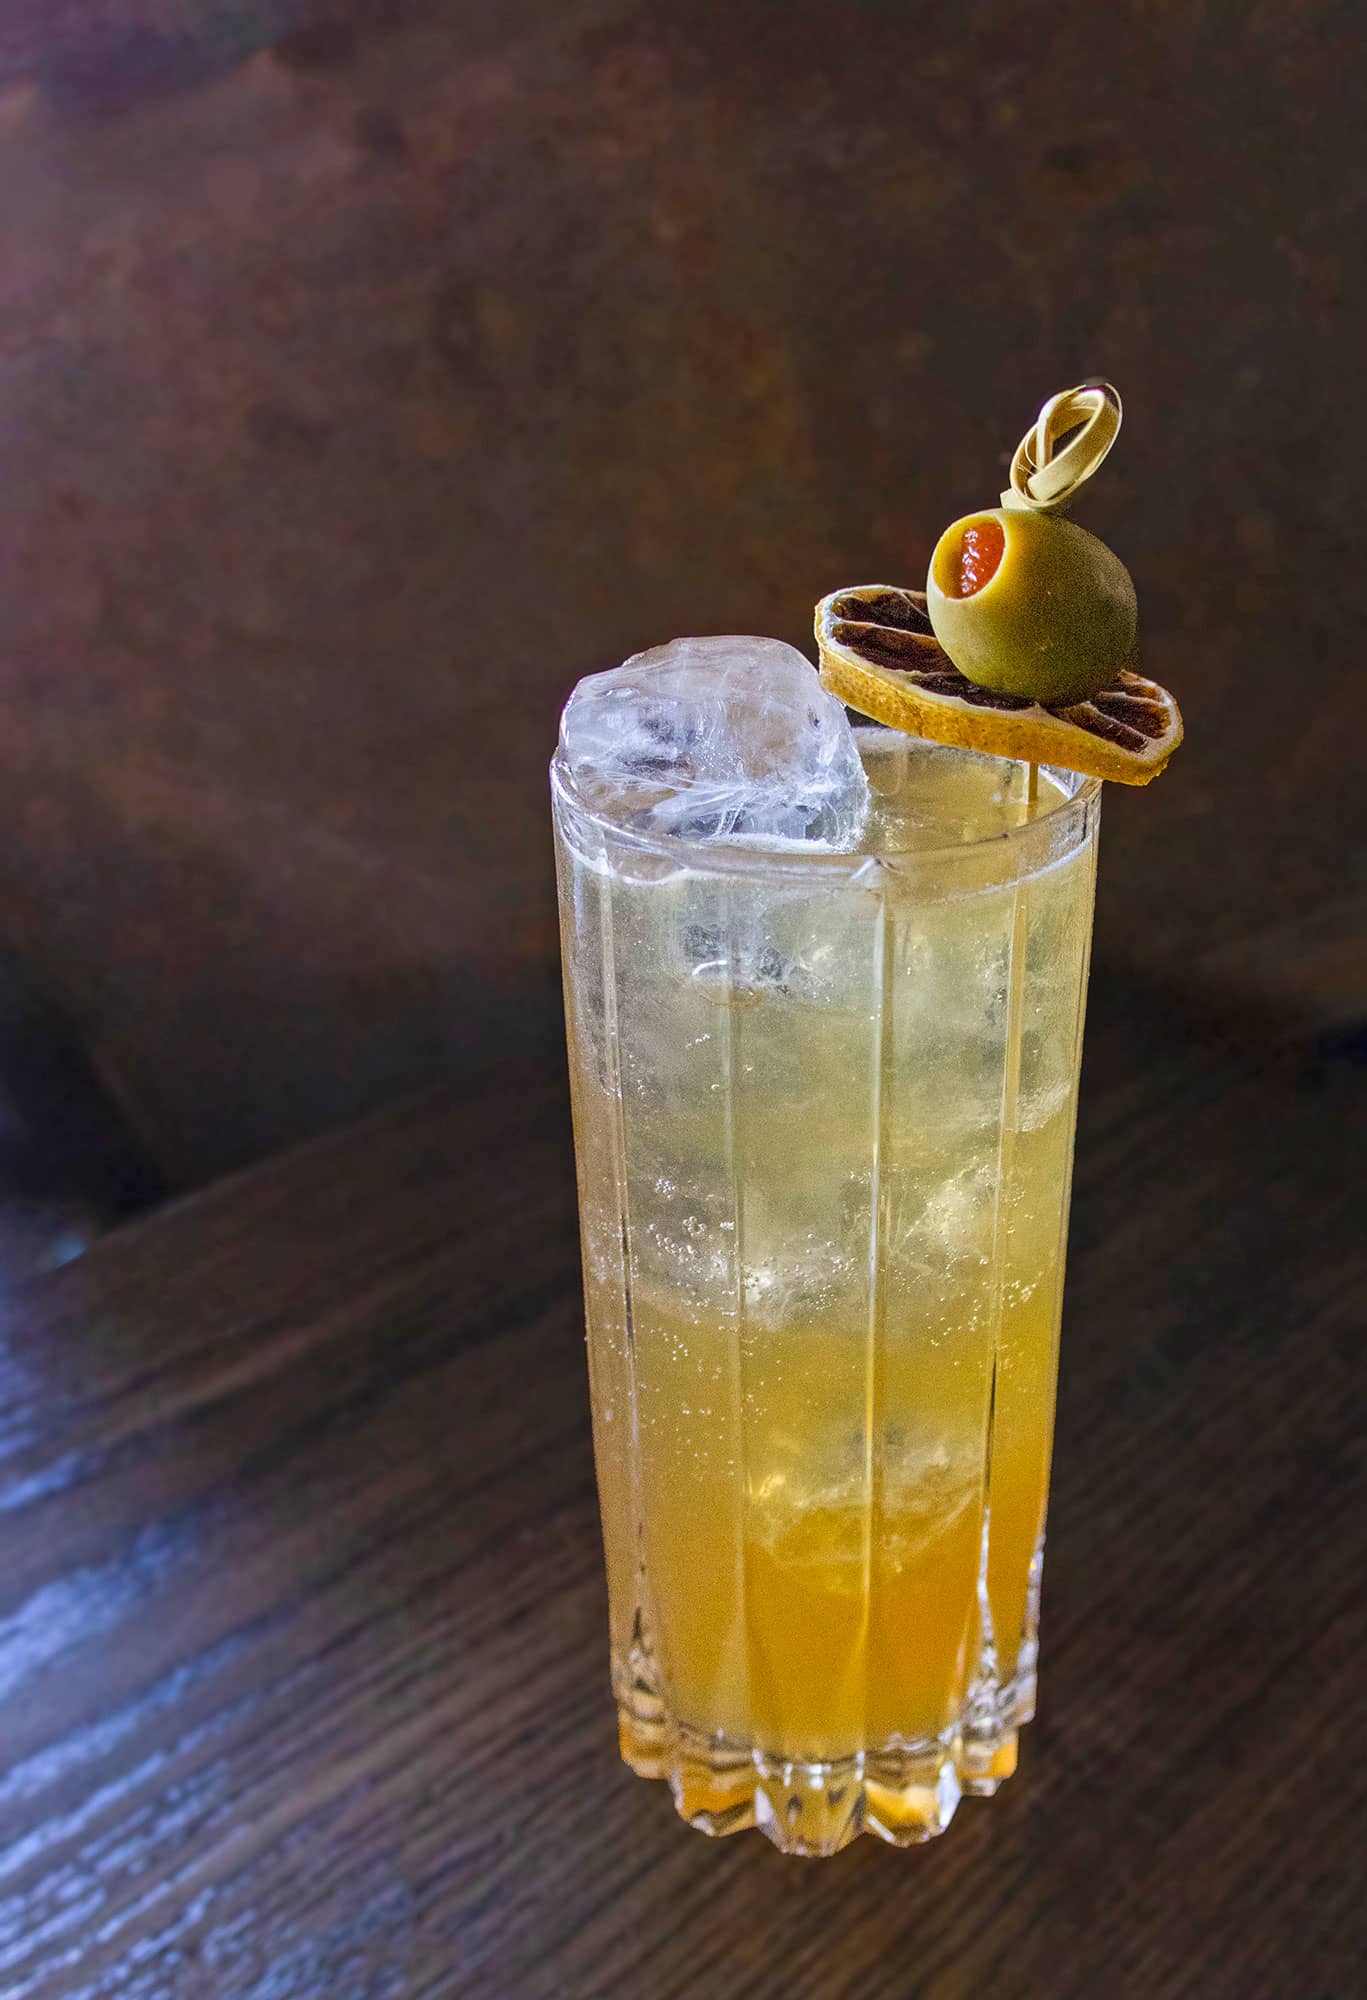 The Good, The Bad, The Ugly mezcal and amaro highball from Julep Houston